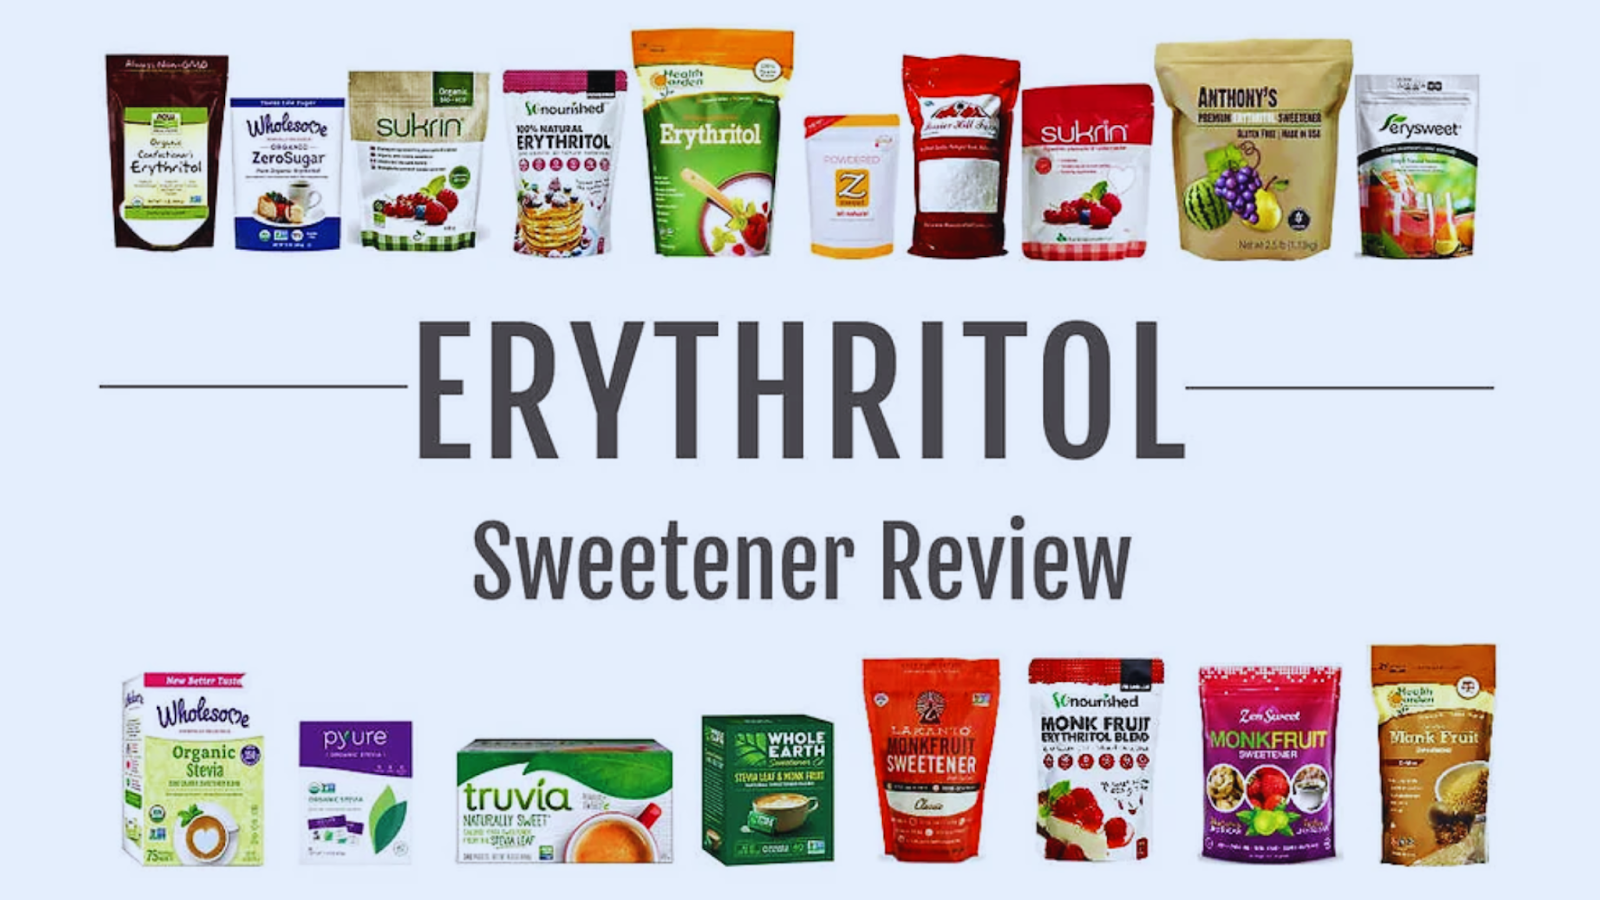 Erythritol products